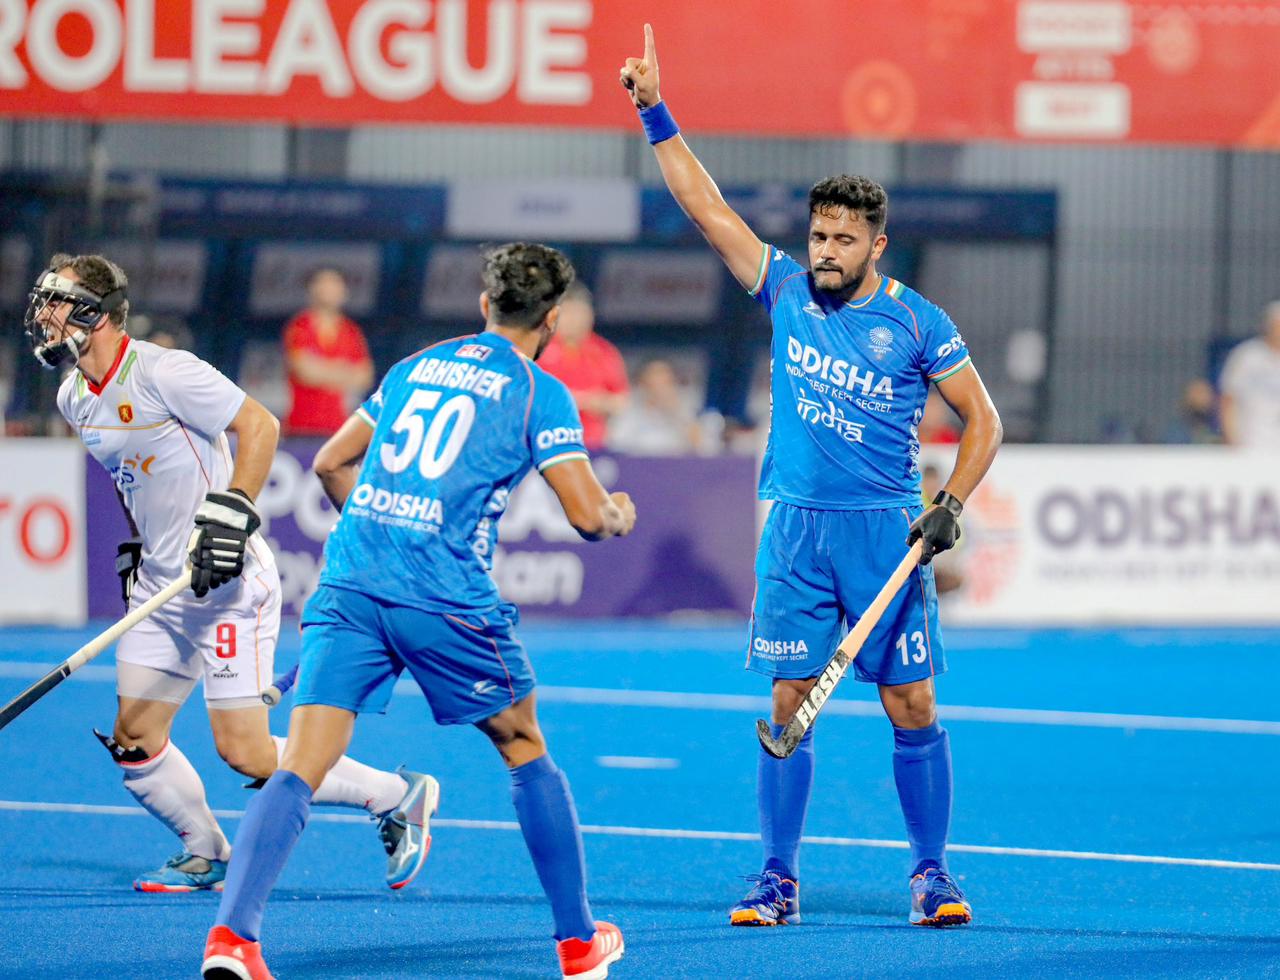 Indian team on third place in Pro Hockey League with a landslide victory over Ireland